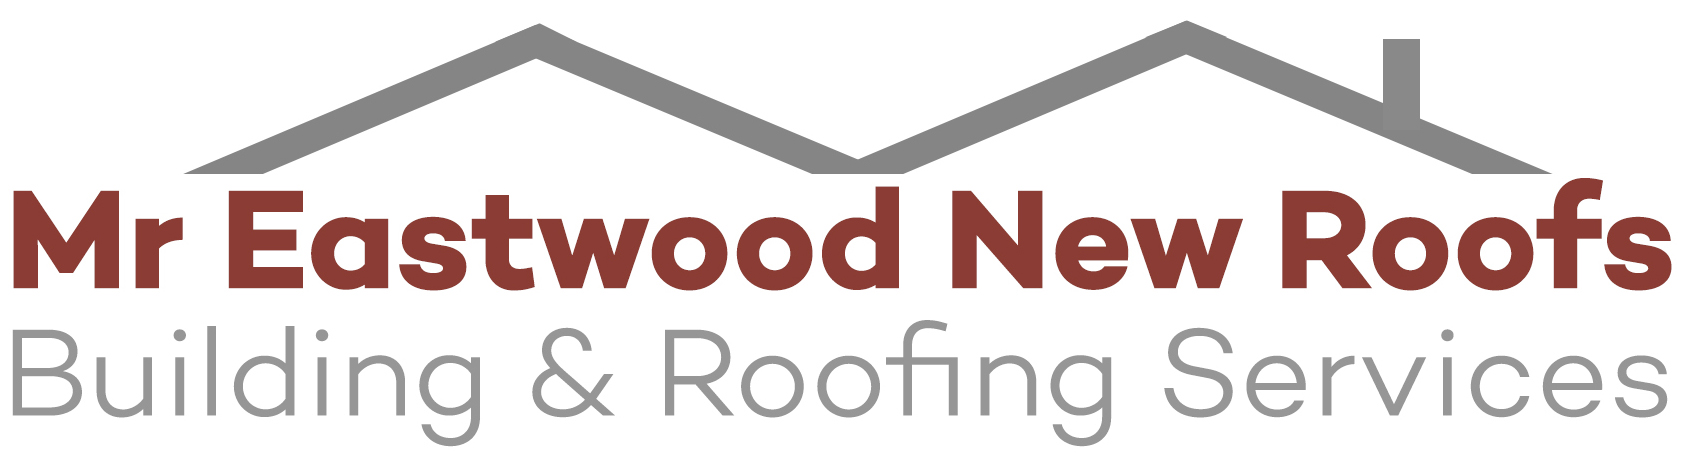 Mr Eastwood New Roofs Logo